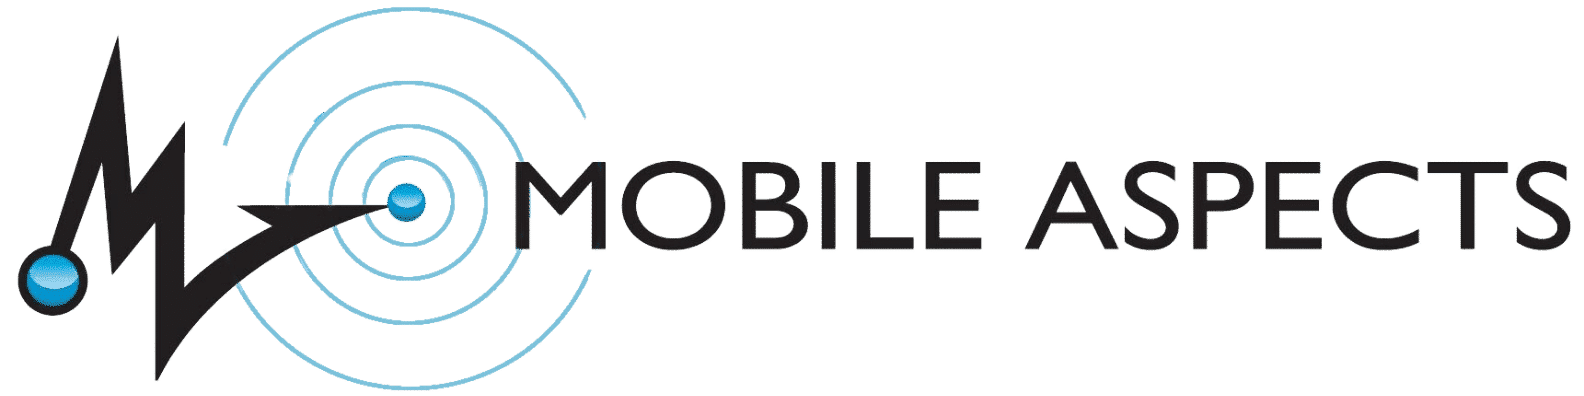 Mobile Aspects